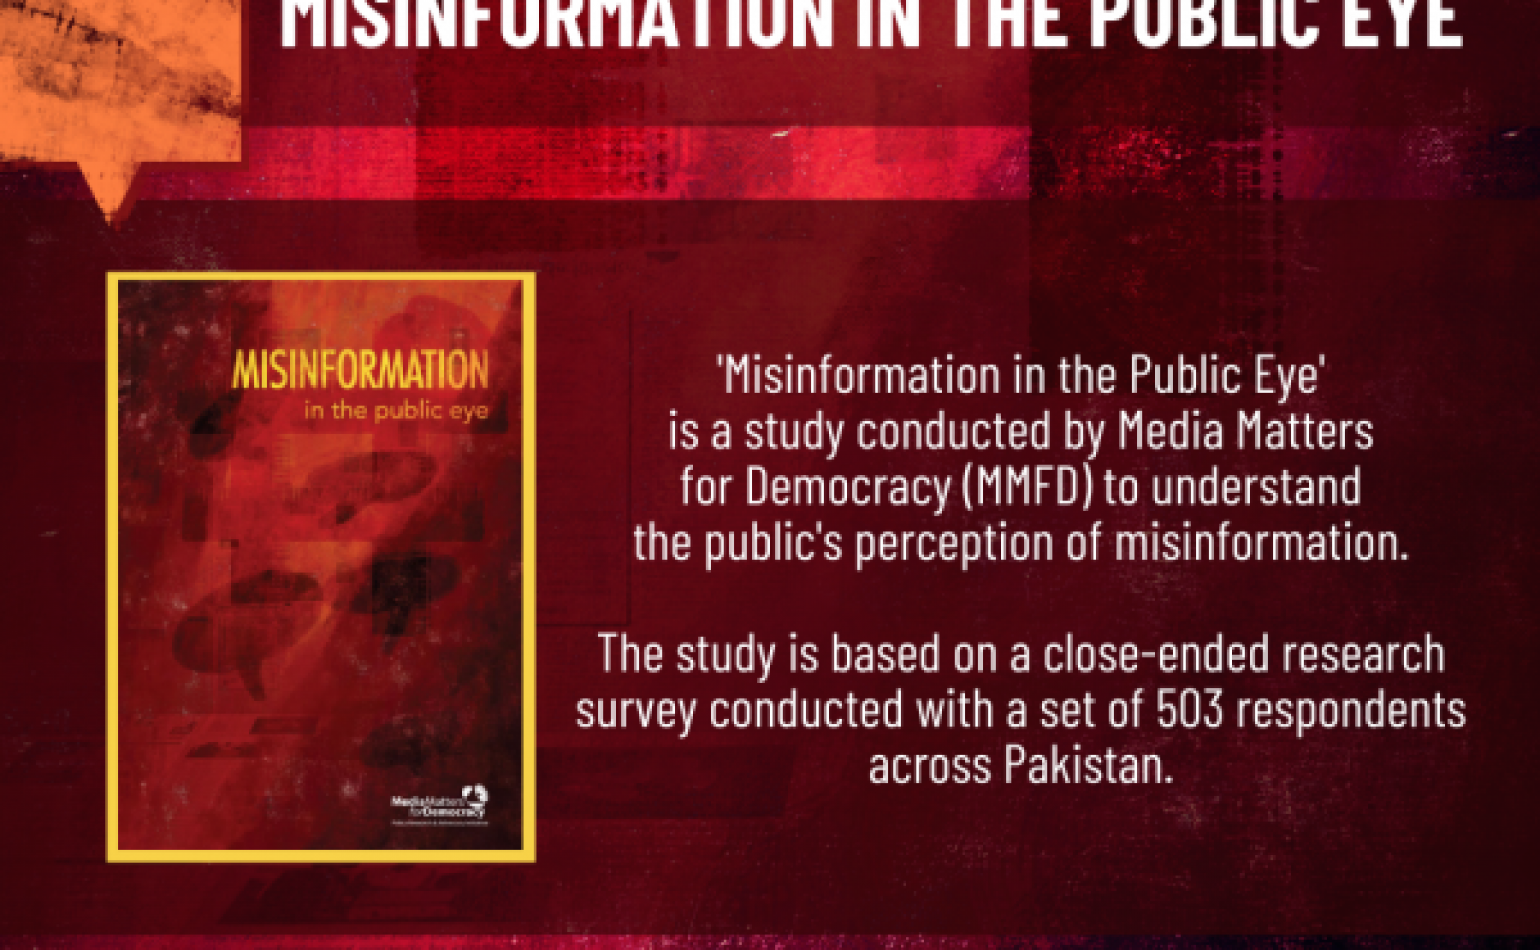 Media Matters for Democracy publishes a new study titled ‘Misinformation in the Public Eye’ which finds that 7 of 10 respondents can not always identify misinformation